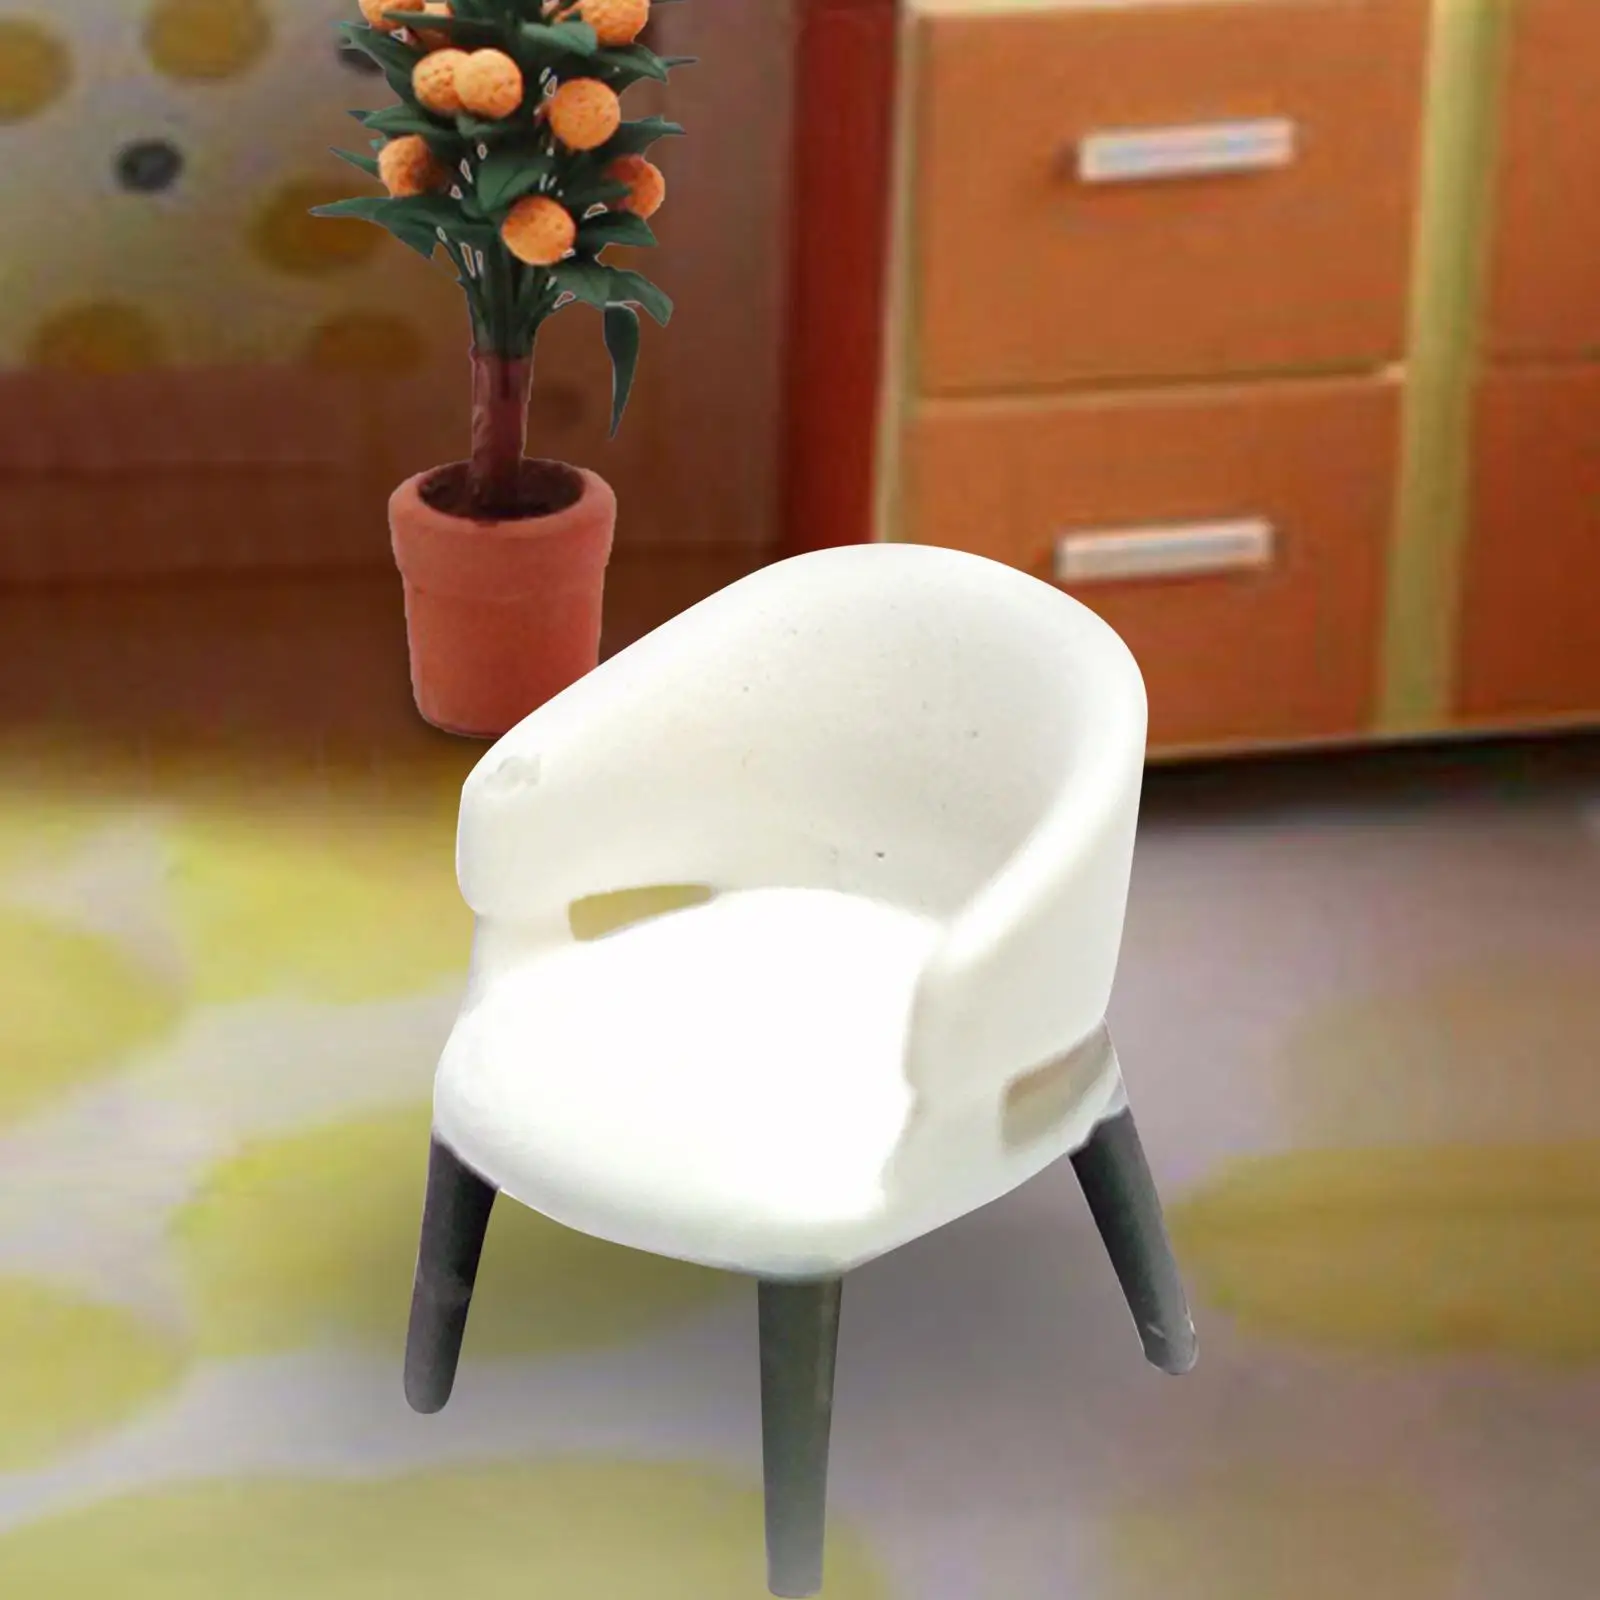 1/87 Tiny Chairs, Miniature 1/87 Scale Armchair, 1/87 Scale Chair Model for DIY Projects Decor